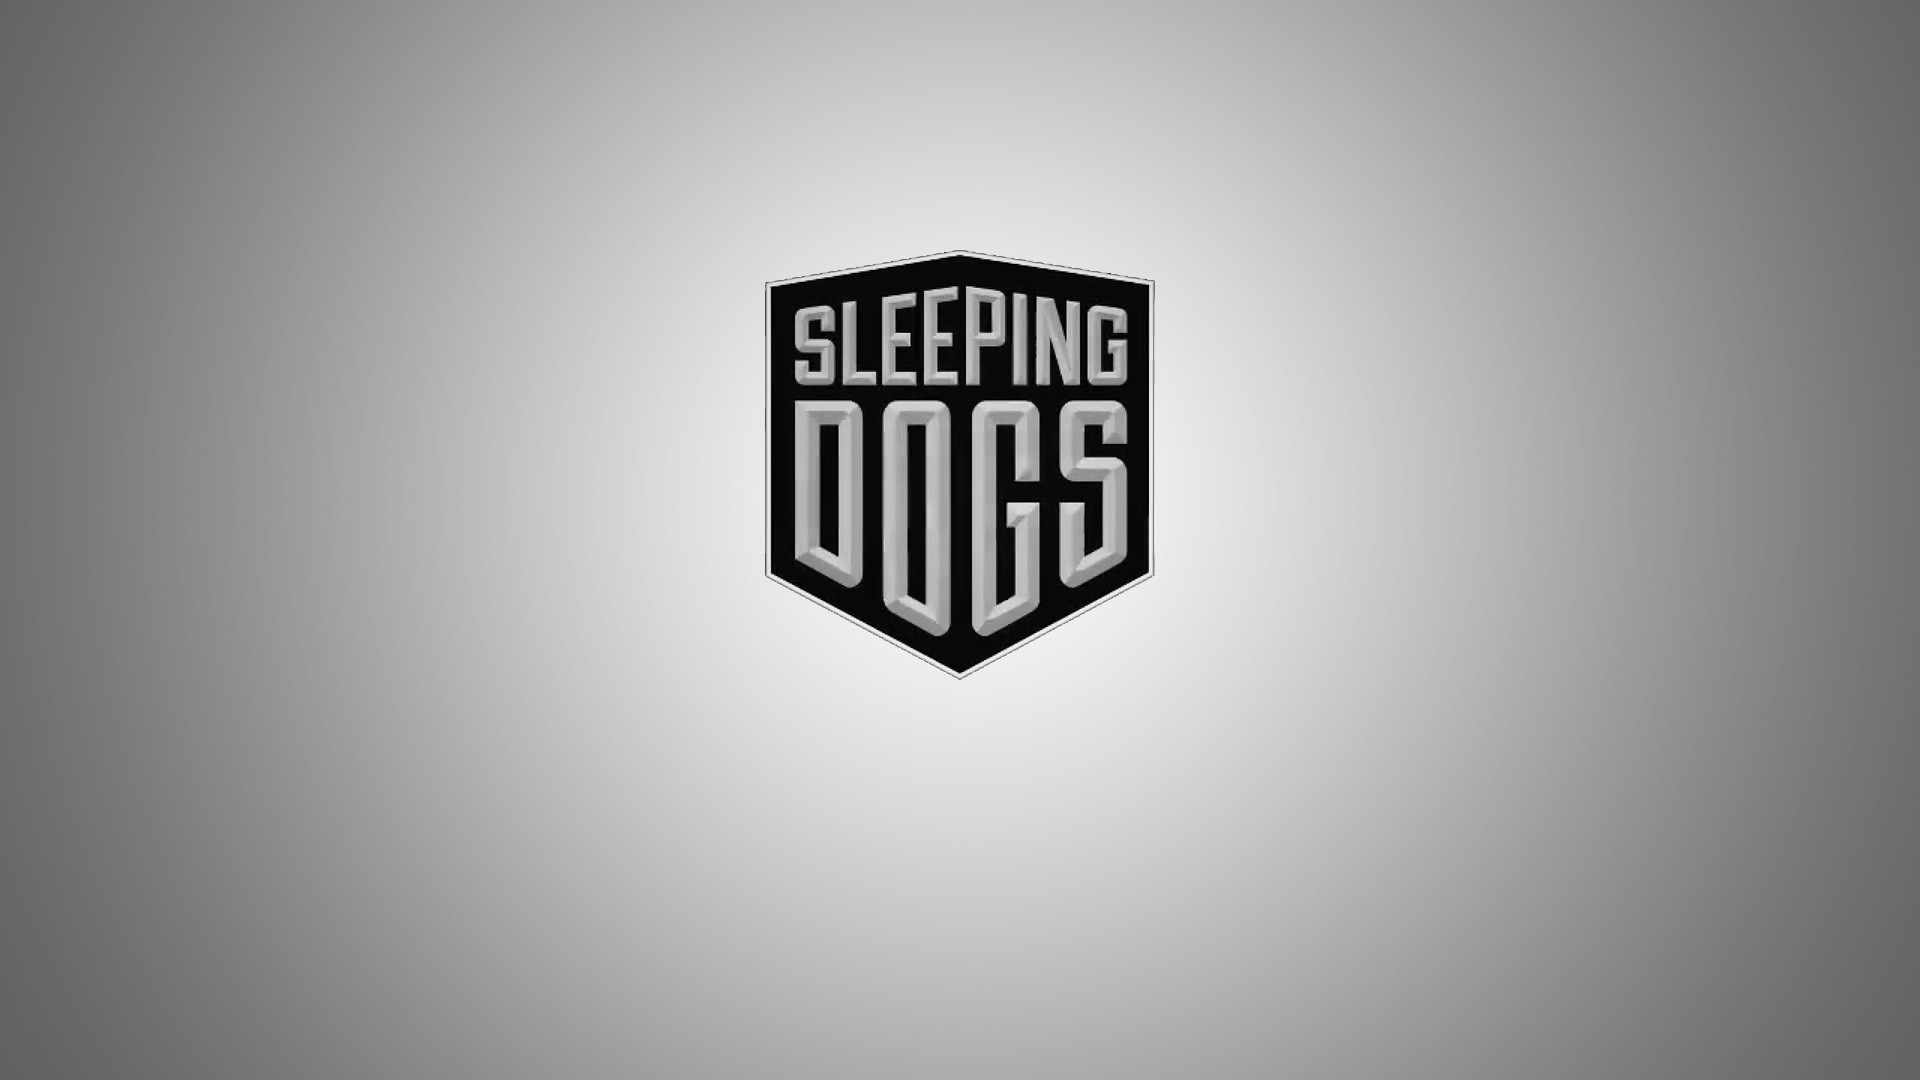 General 1920x1080 Sleeping Dogs video games video game art PC gaming logo simple background